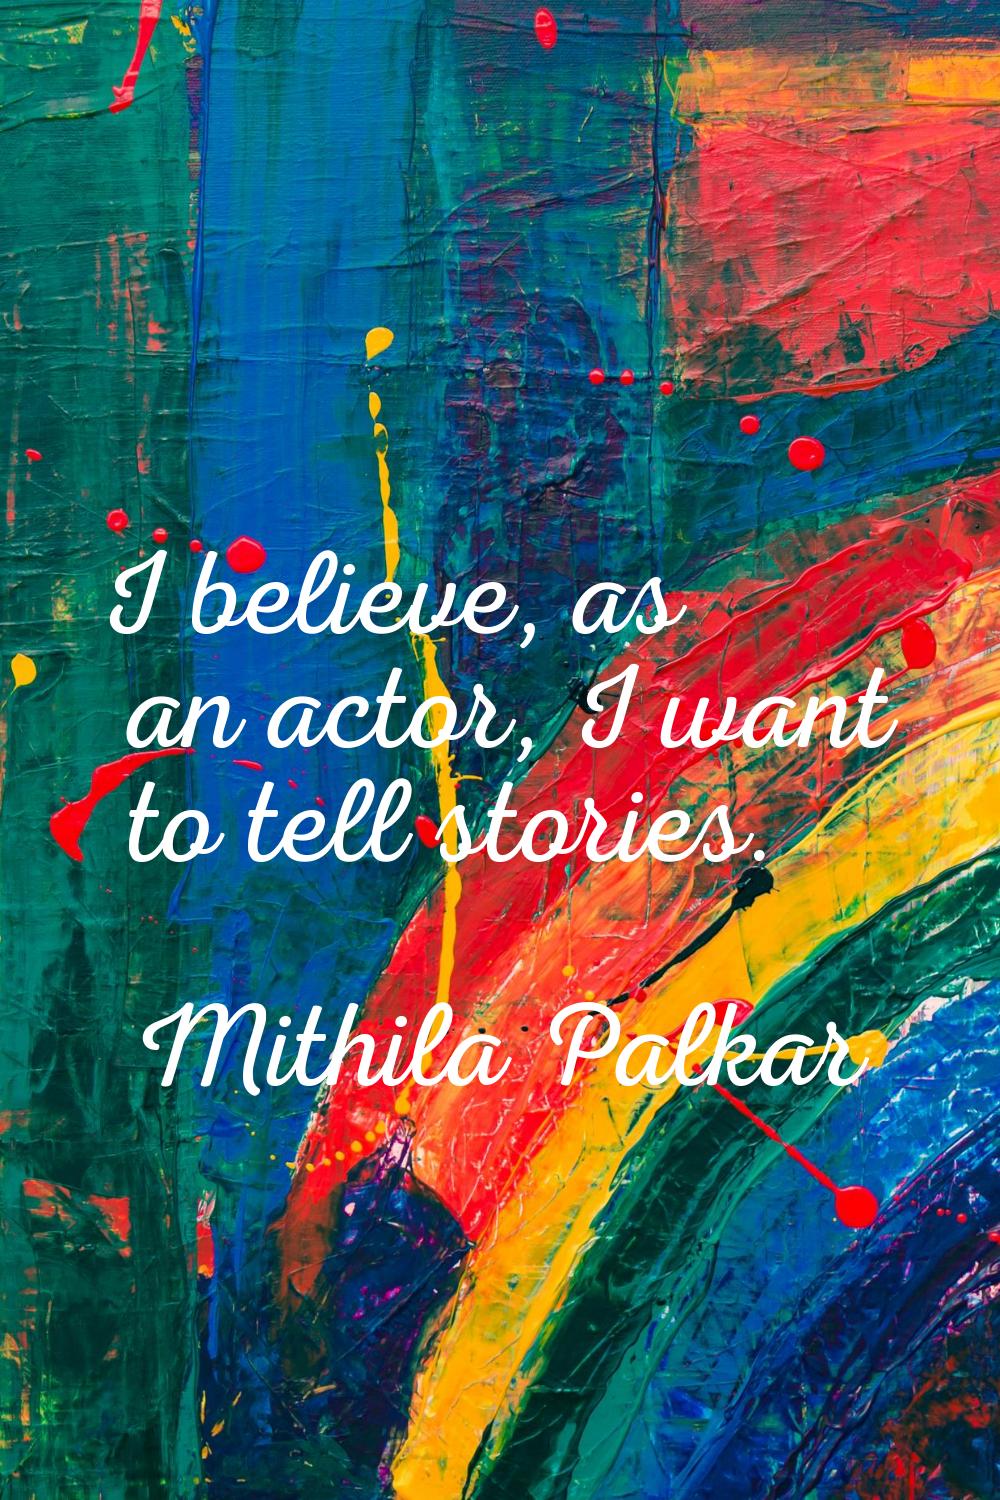 I believe, as an actor, I want to tell stories.